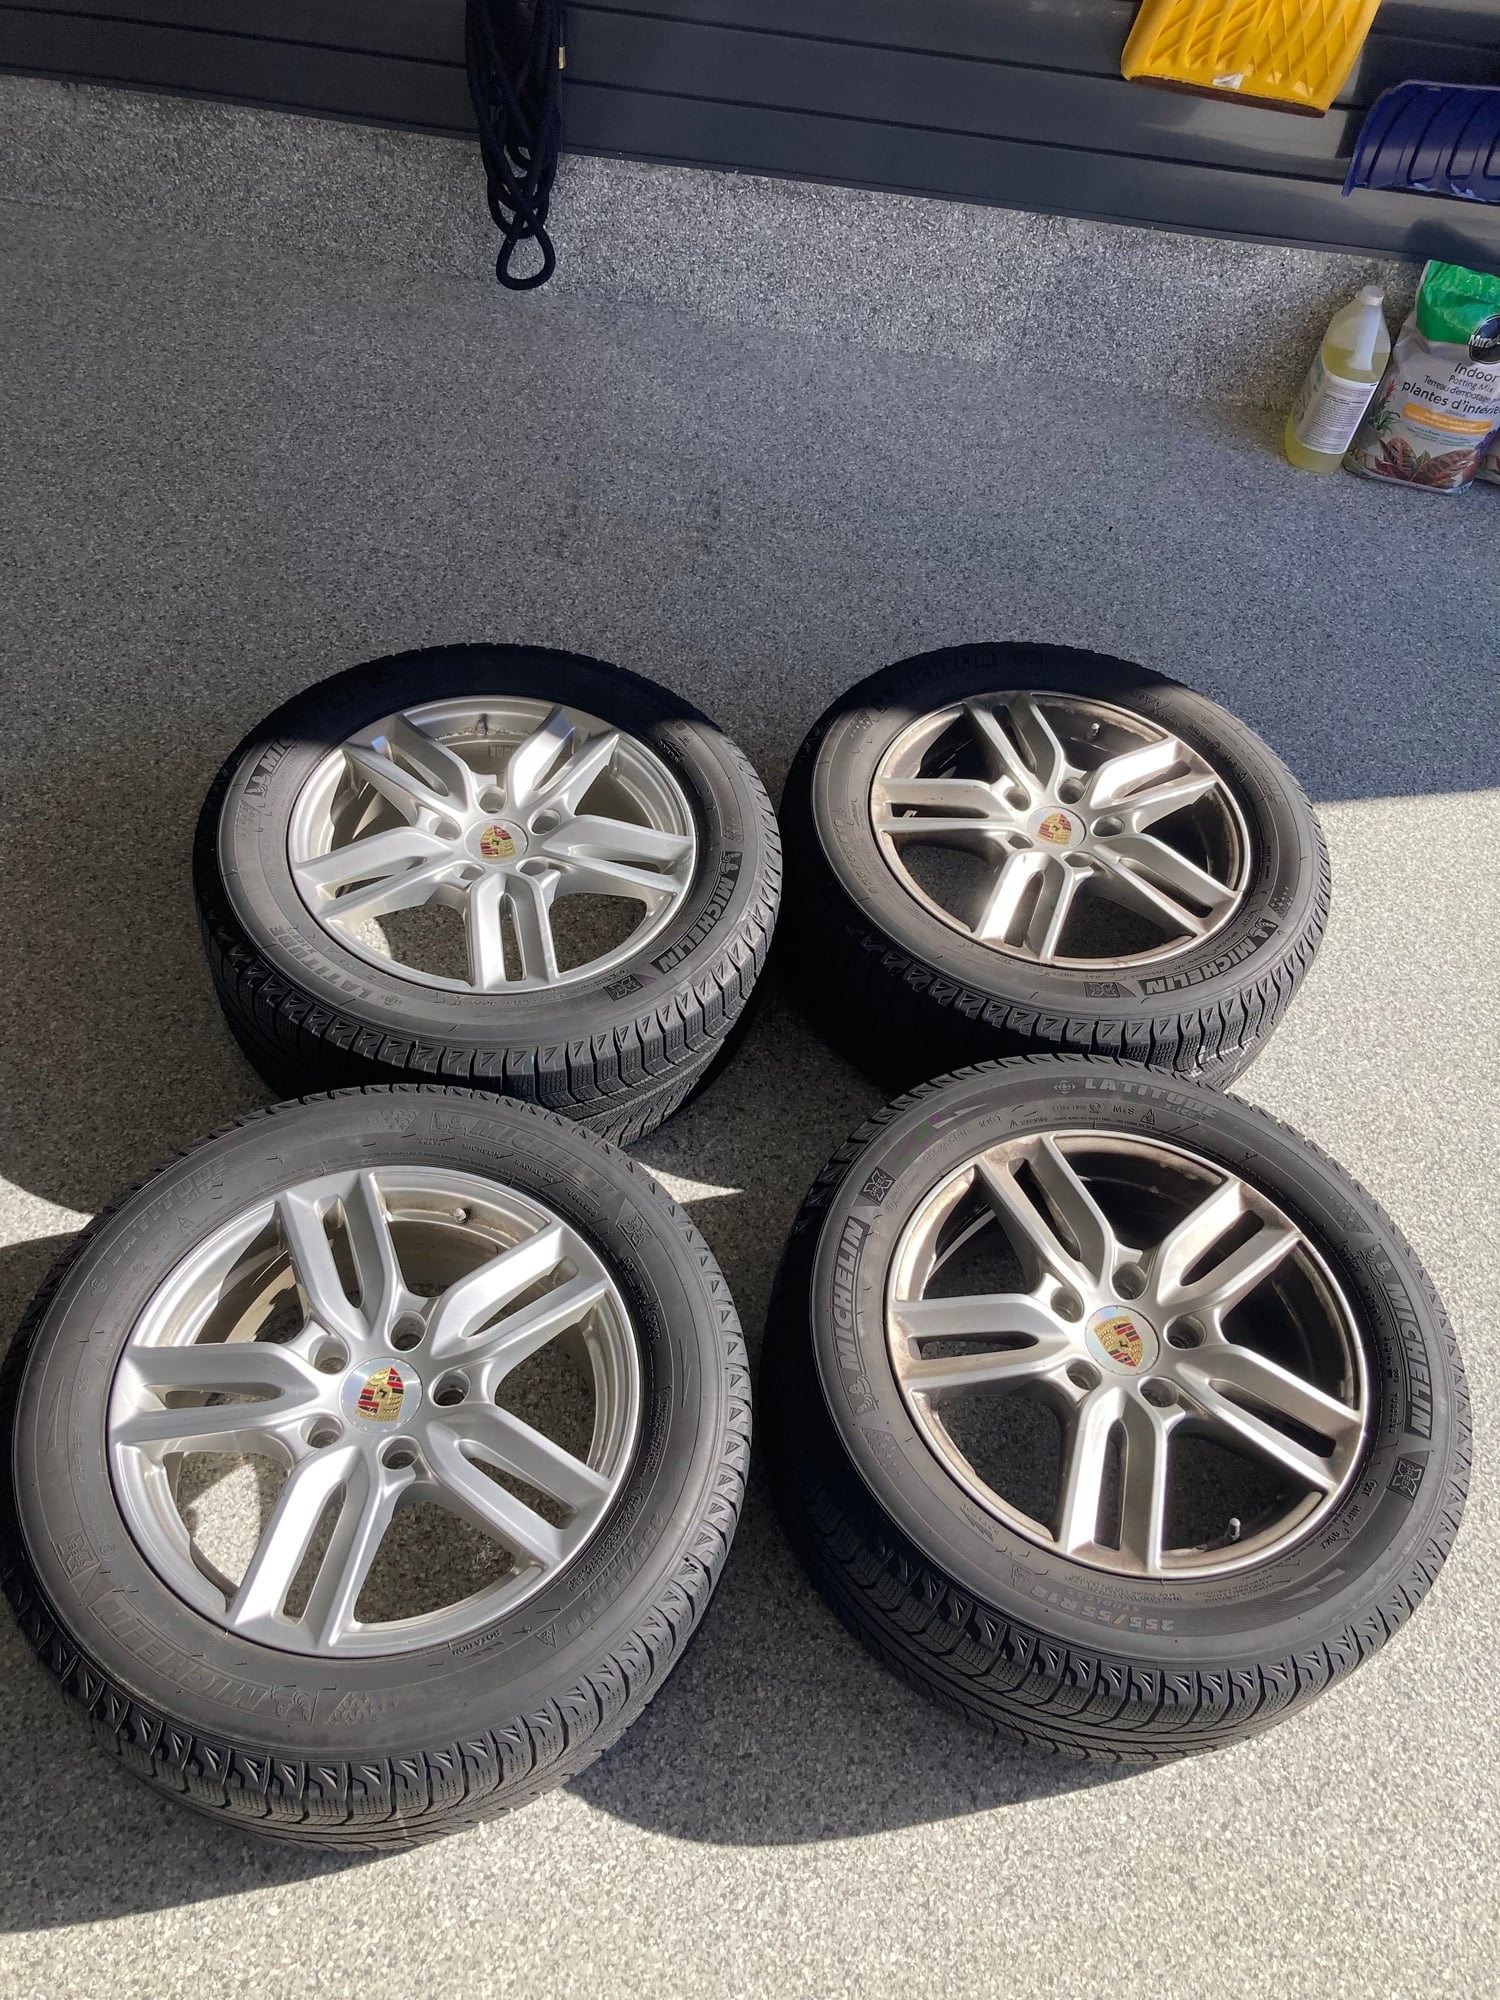 Wheels and Tires/Axles - Winter wheels/tires Cayenne - Used - 2011 to 2018 Porsche Cayenne - Oakville, ON L6K0H3, Canada